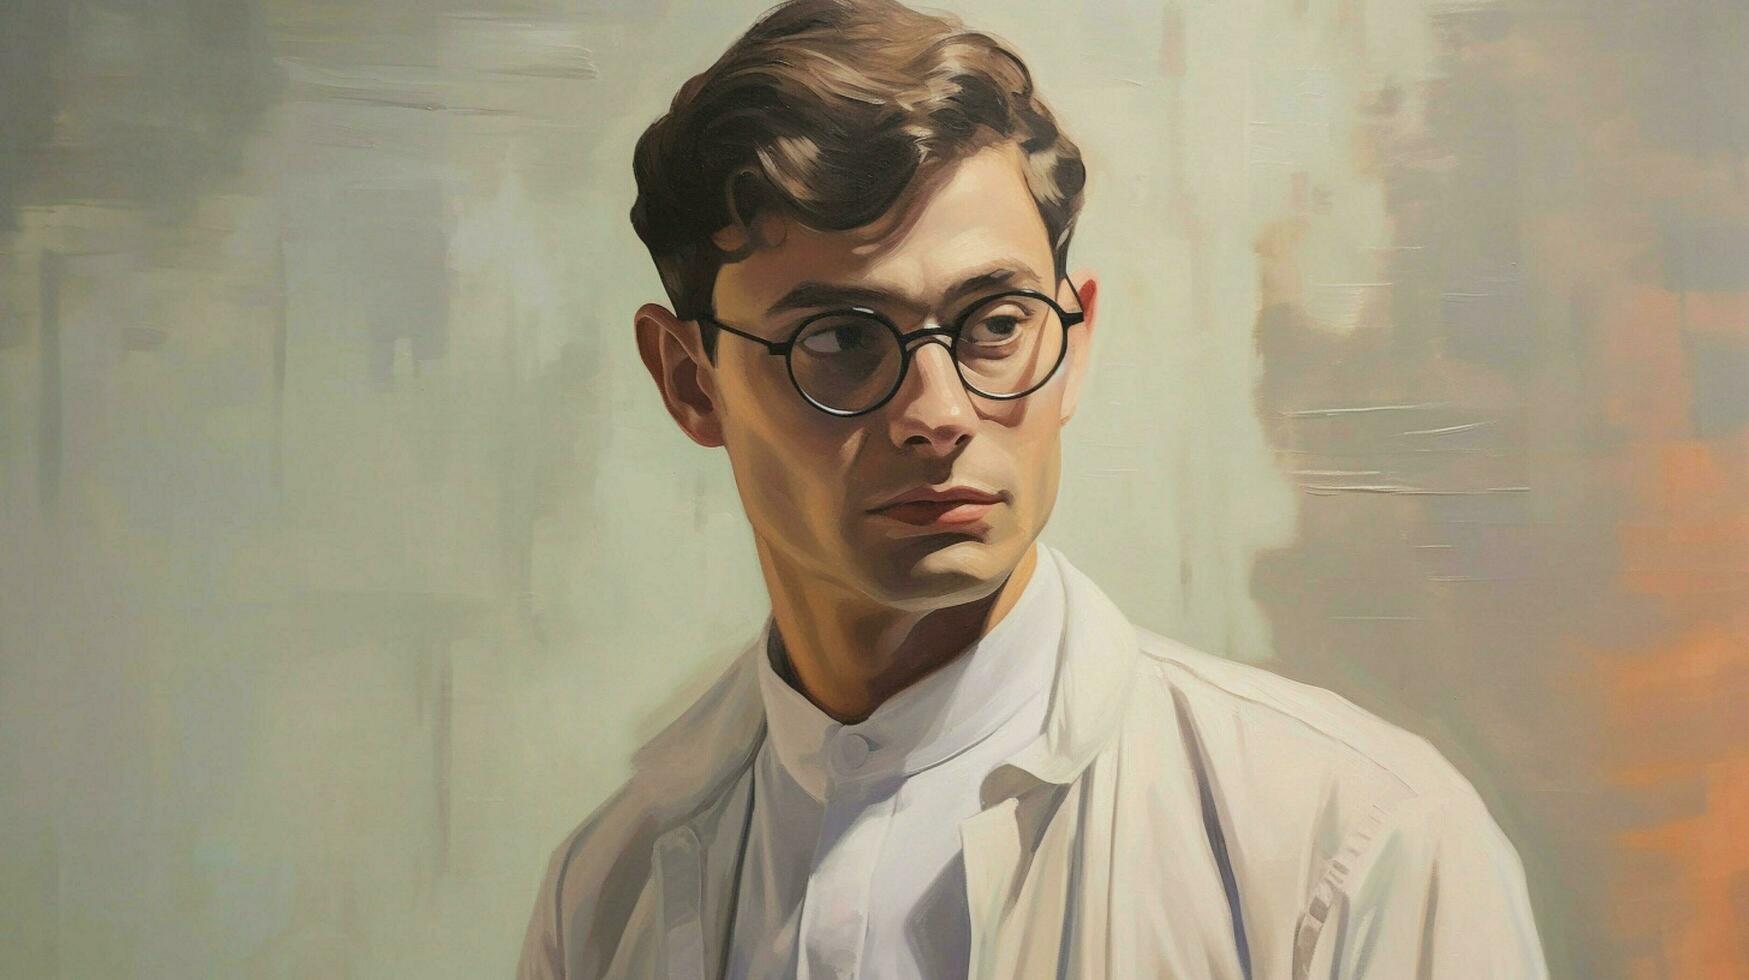 a painting of a man with glasses and a white shirt photo